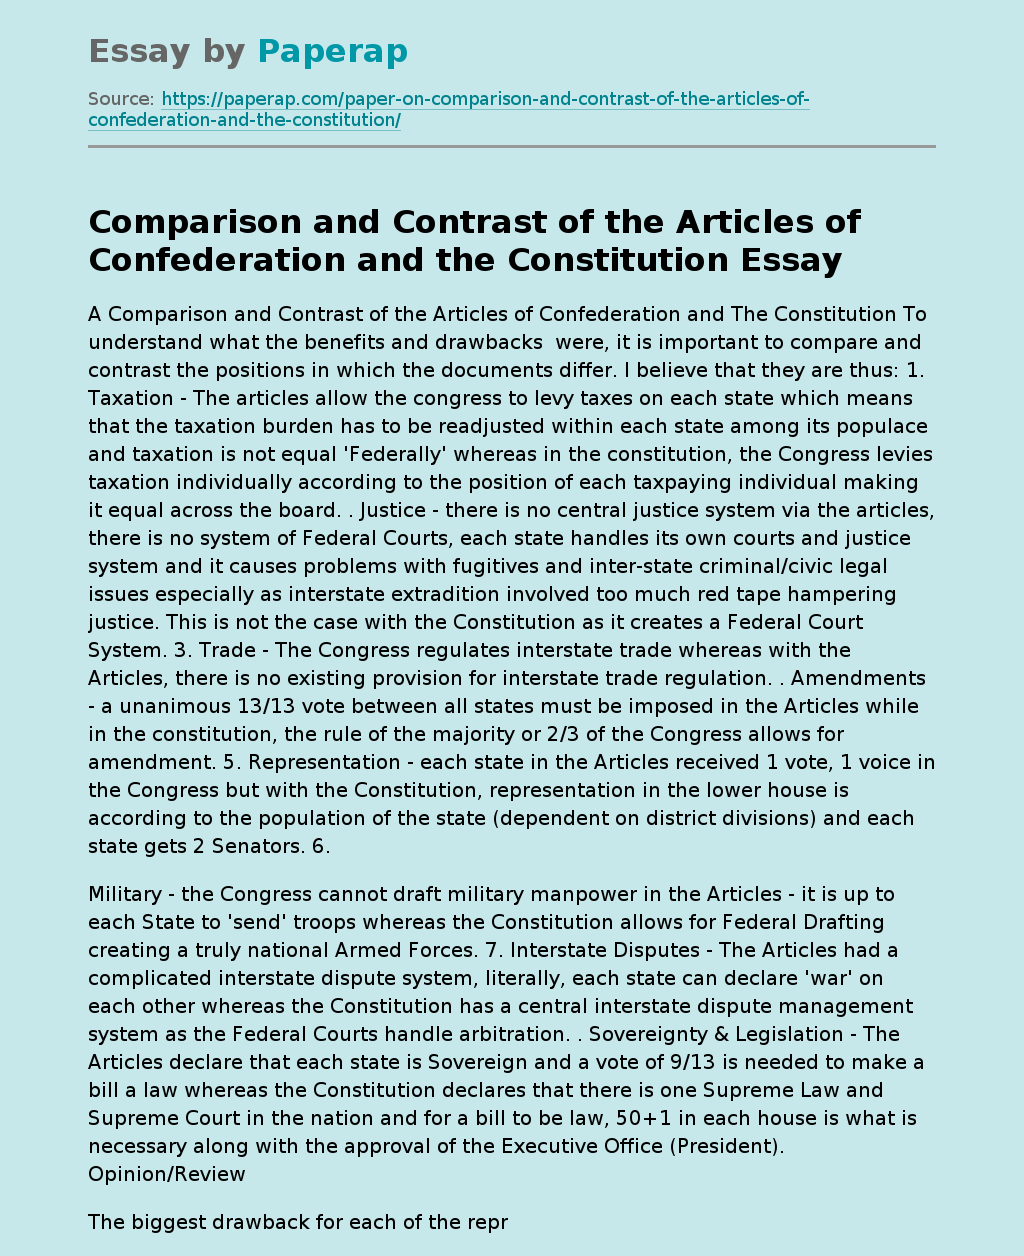 Comparison and Contrast of the Articles of Confederation and the Constitution